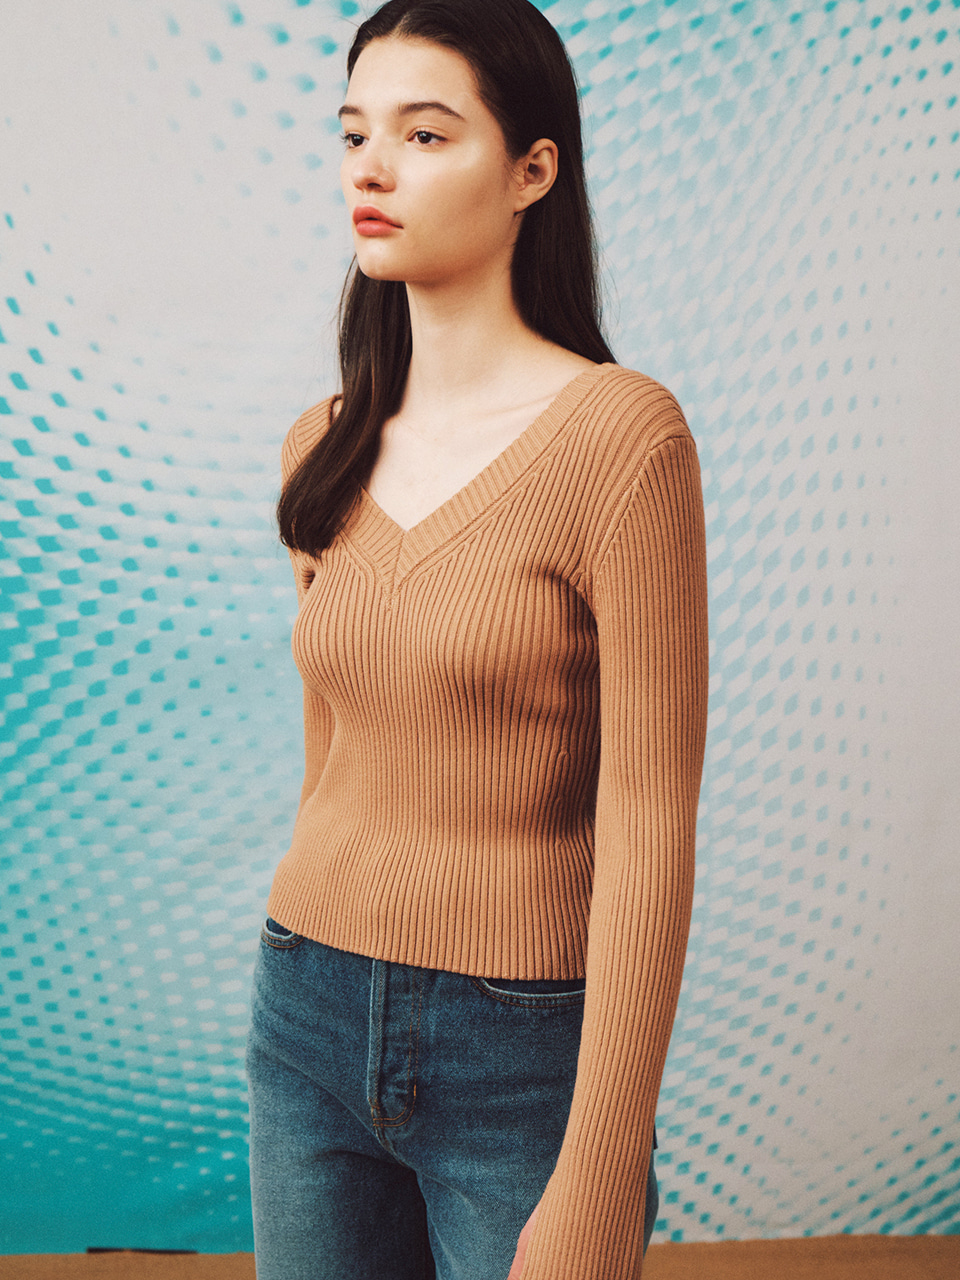 DEBBYS TWO WAY NECK POINT KNIT TOP